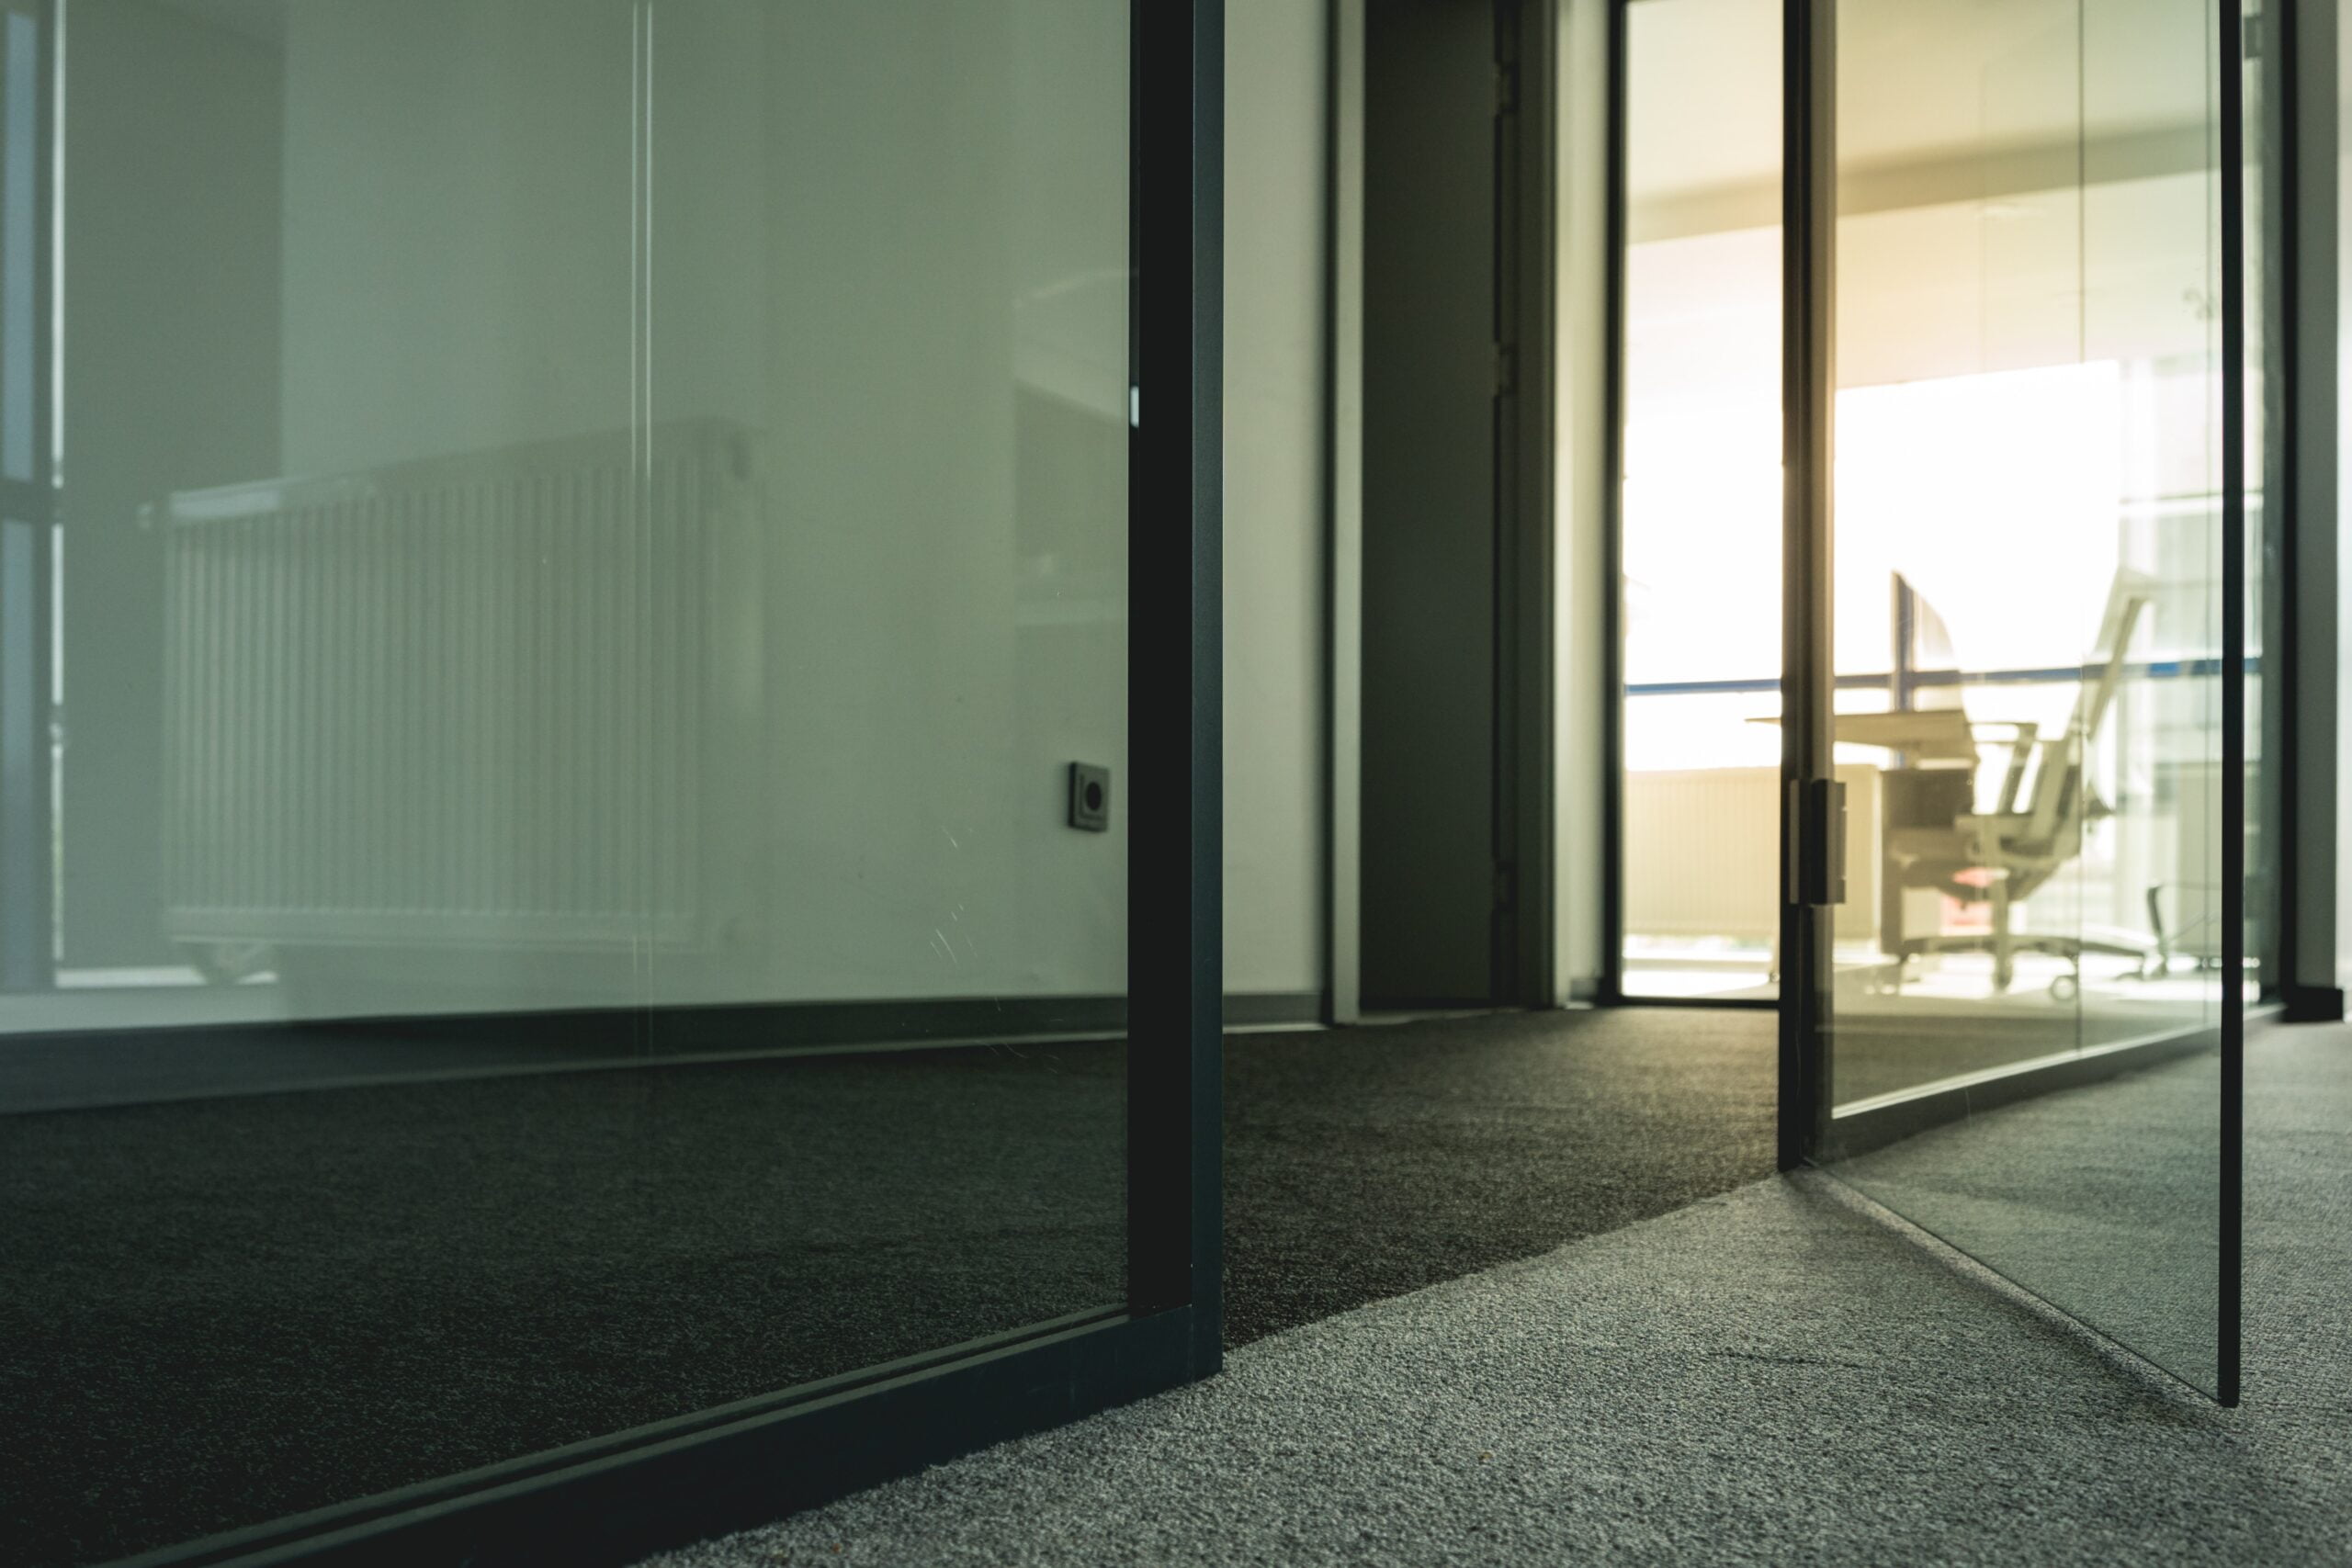 Inside an office building, Dark grey carpet with glass walls and door more than half way opened